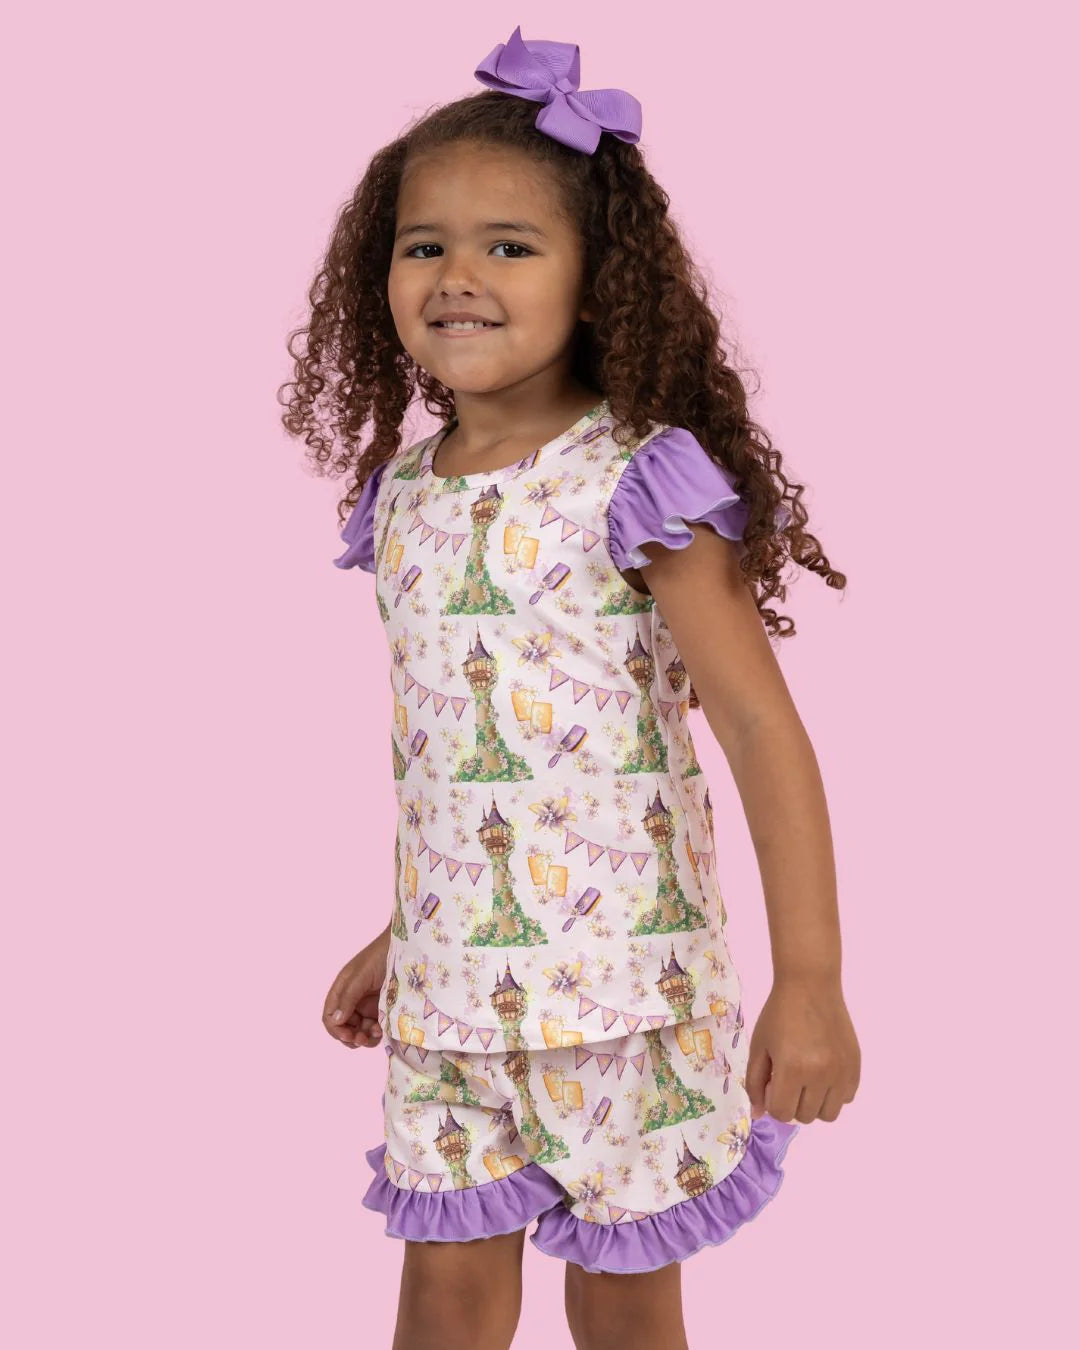 (Preorder) Let Your Hair Down Girl’s Loungewear Set by Pete + Lucy